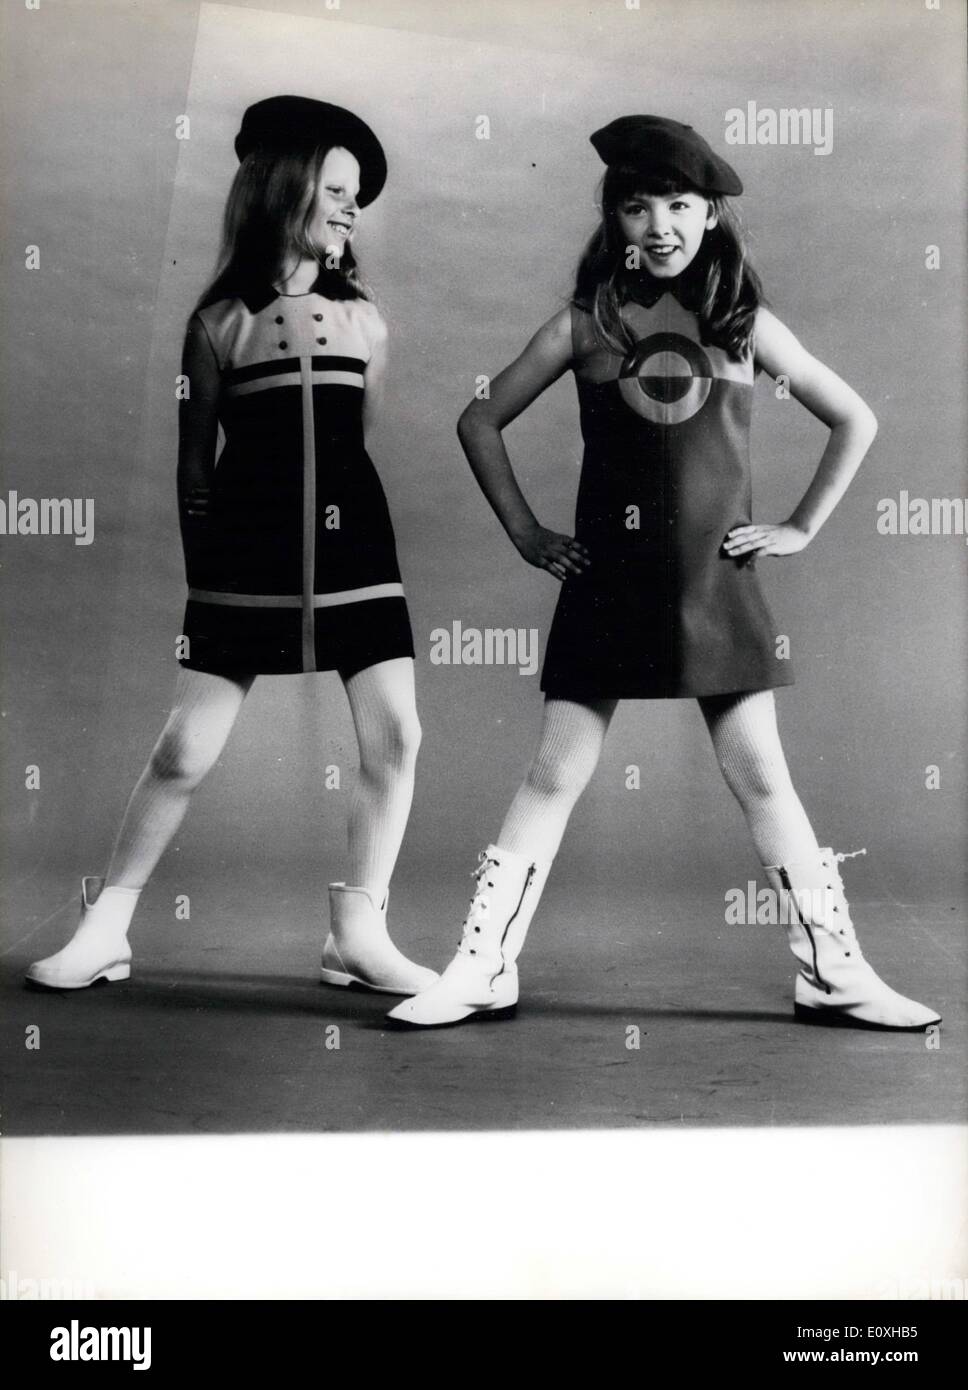 Oct. 10, 1966 - Fashions for little girls: Photo shows two twelve year ...